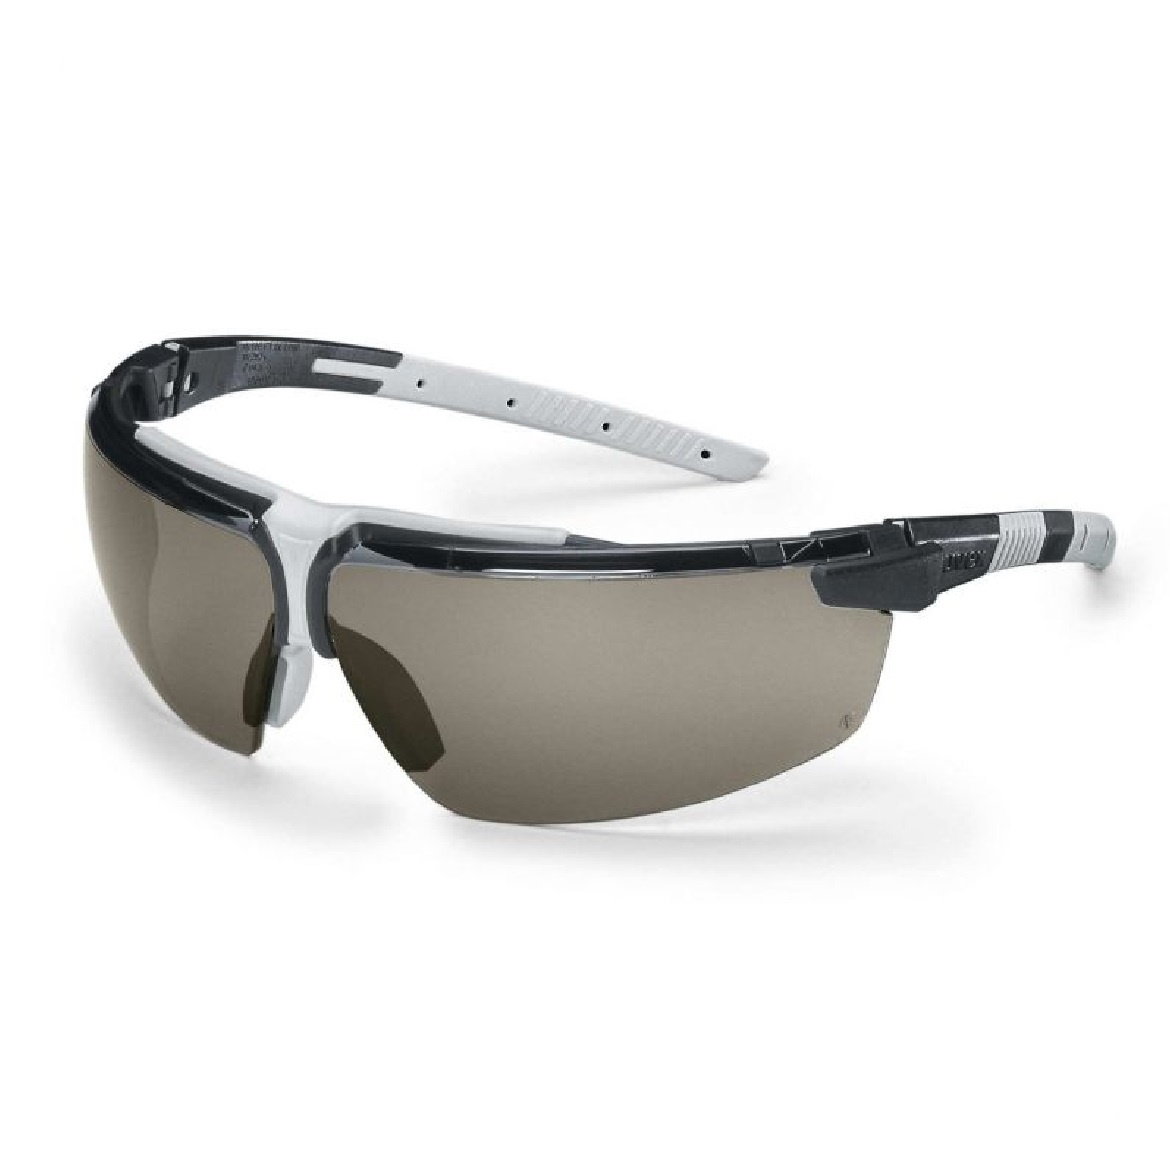 UVEX 9190-281 i-3 ANTI-GLARE Protective Safety Spectacles Grey